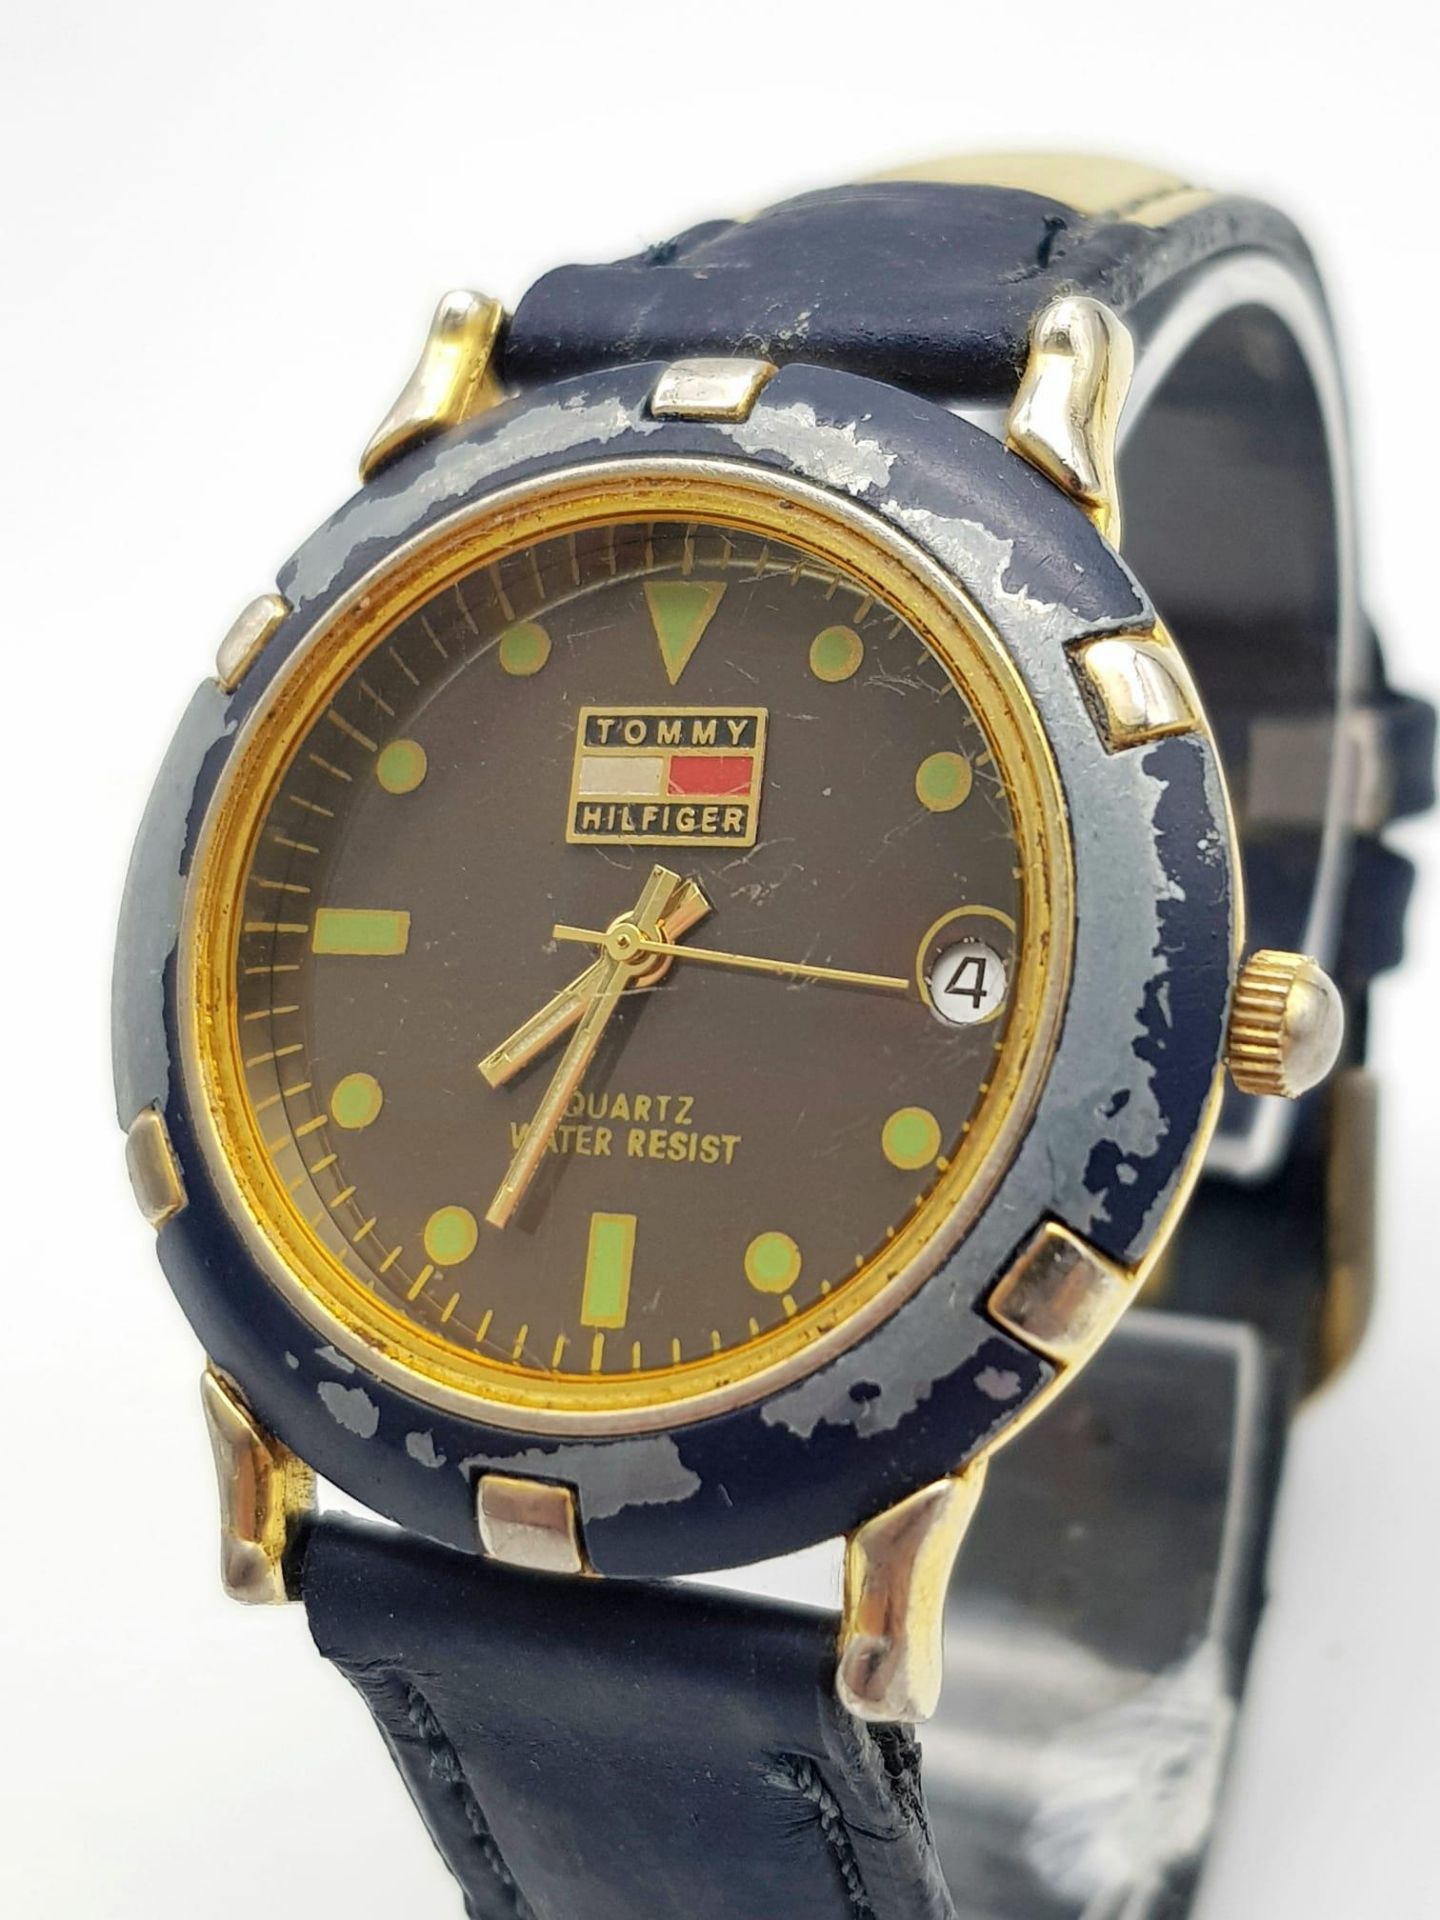 TOMMY HILFIGER WATCH REQUIRES NEW BATTERY AF - Image 3 of 5